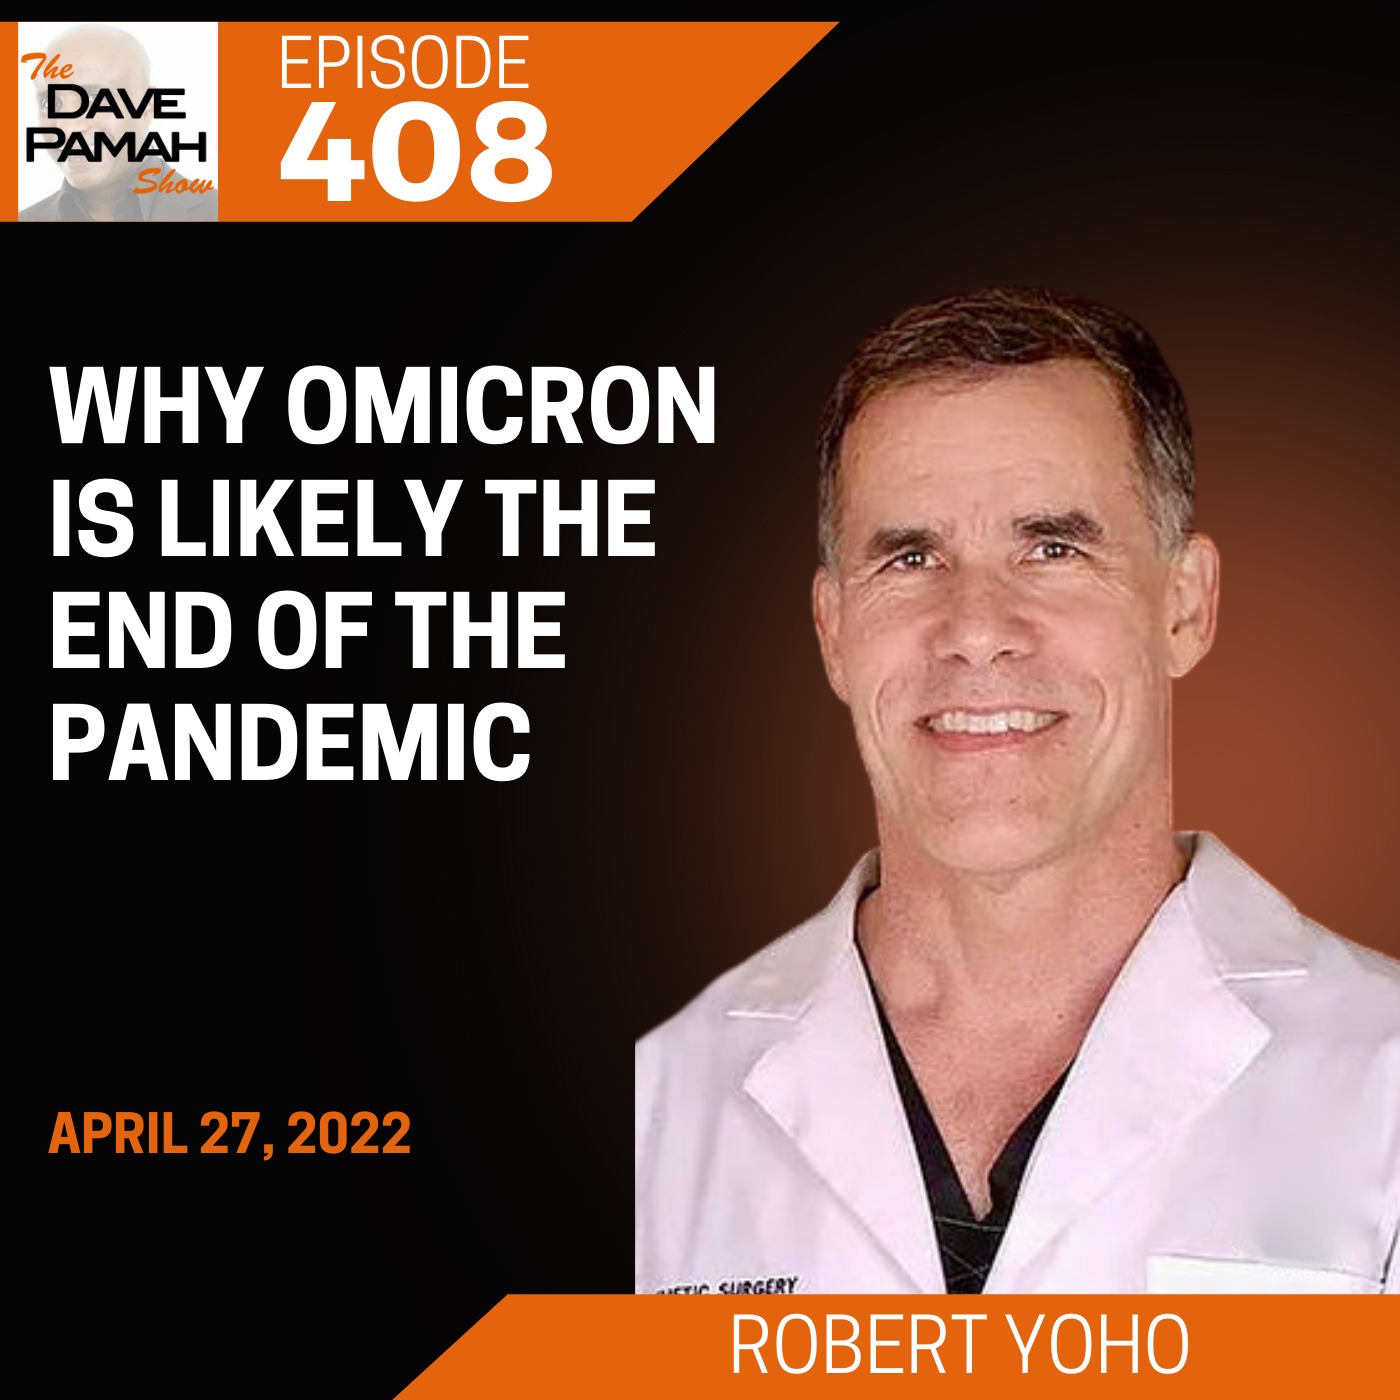 Why omicron is likely the end of the pandemic with Robert Yoho Image